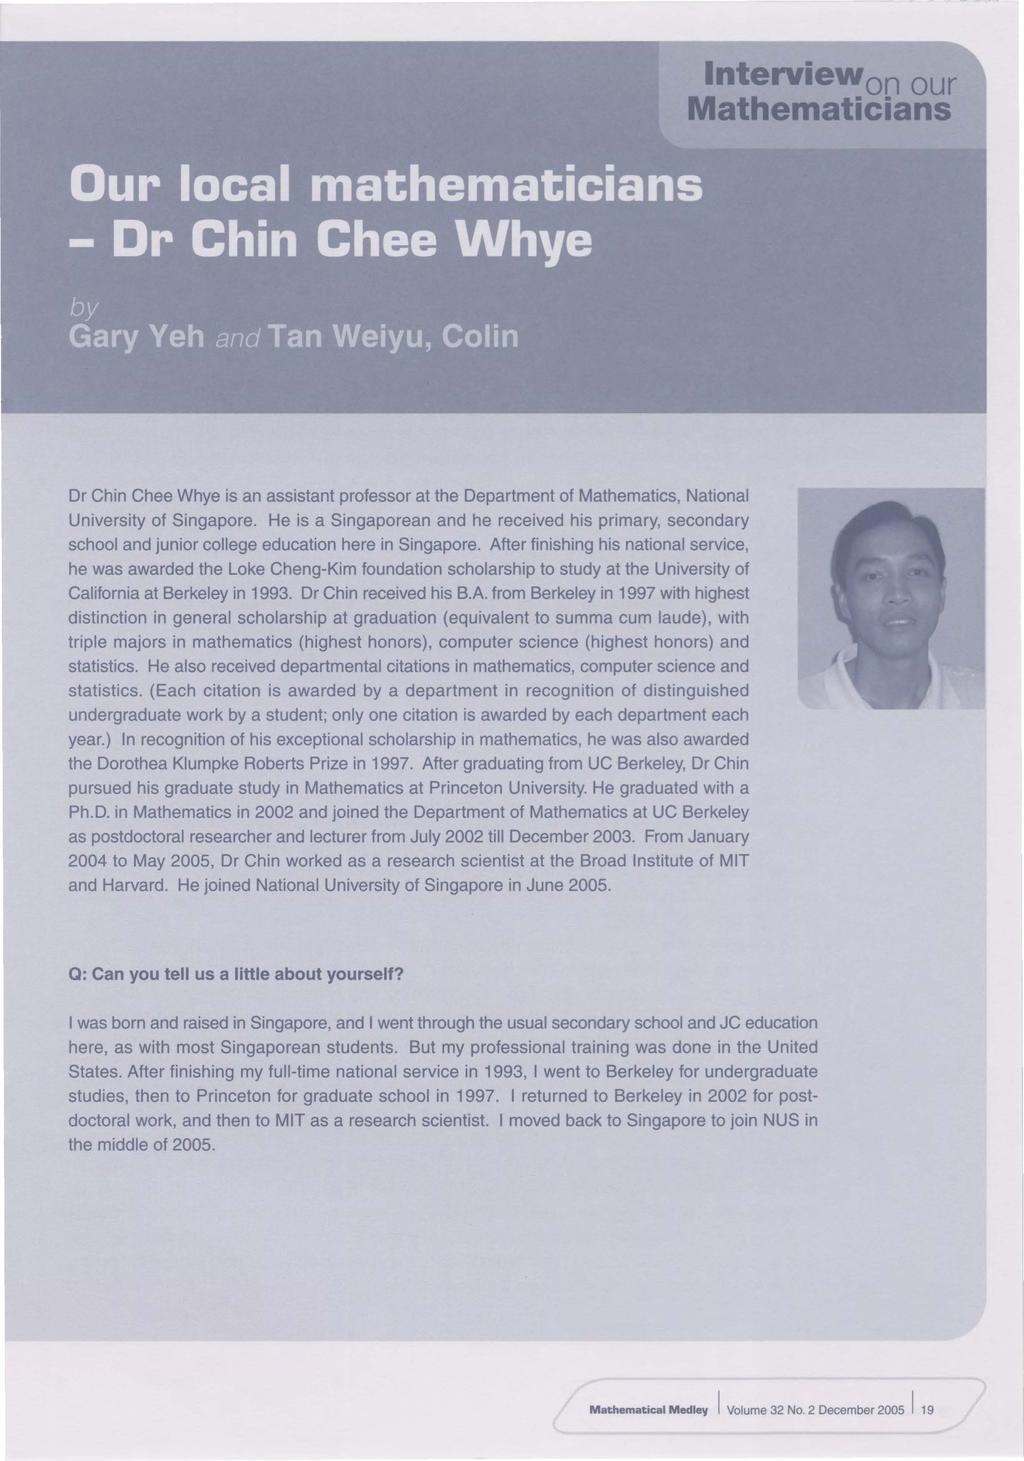 Dr Chin Chee Whye is an assistant professor at the Department of Mathematics, National University of Singapore.